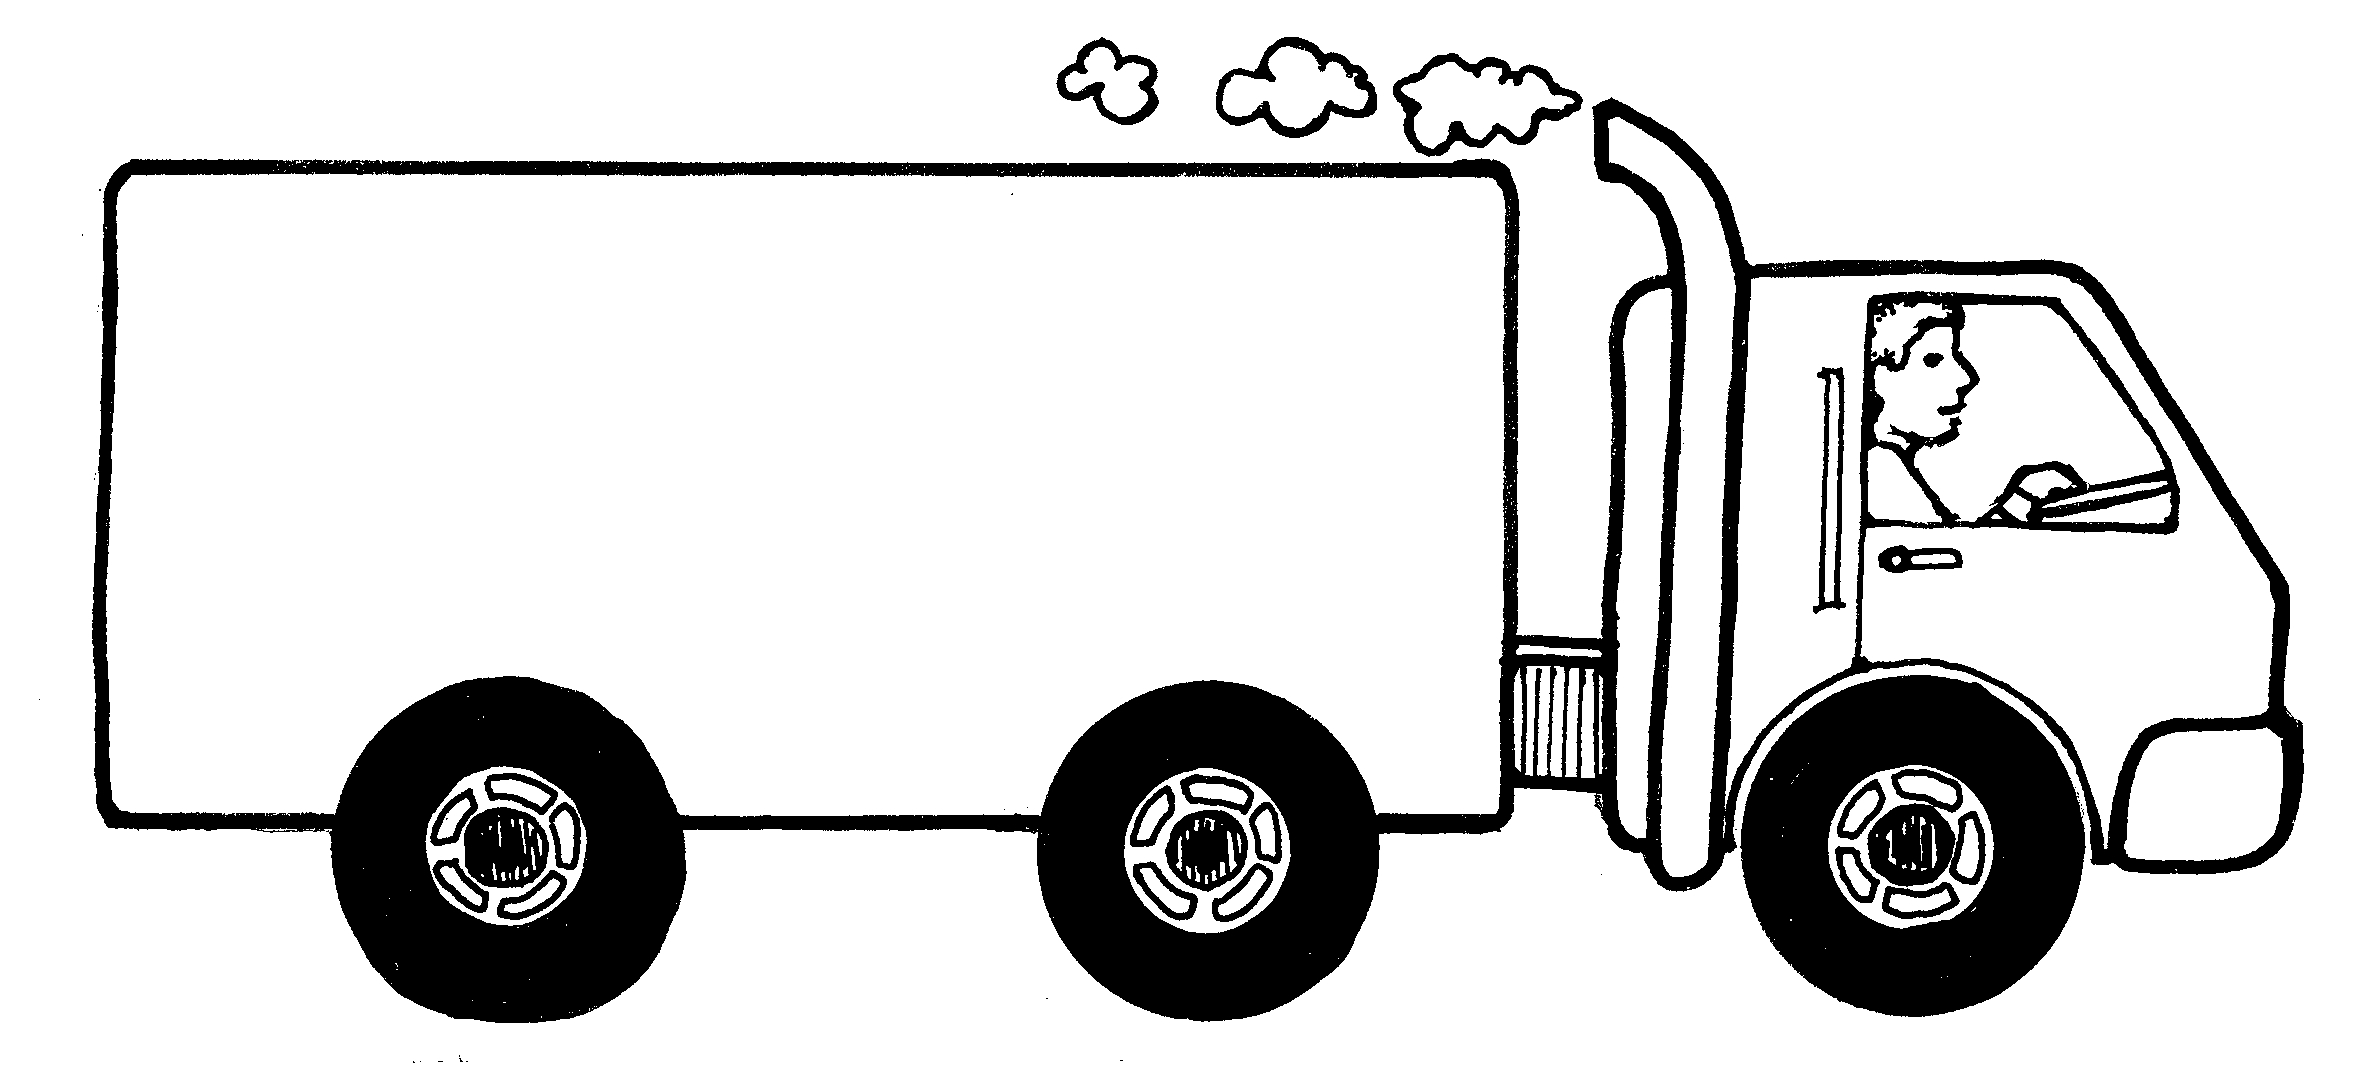 Moving Van Clipart Black and .